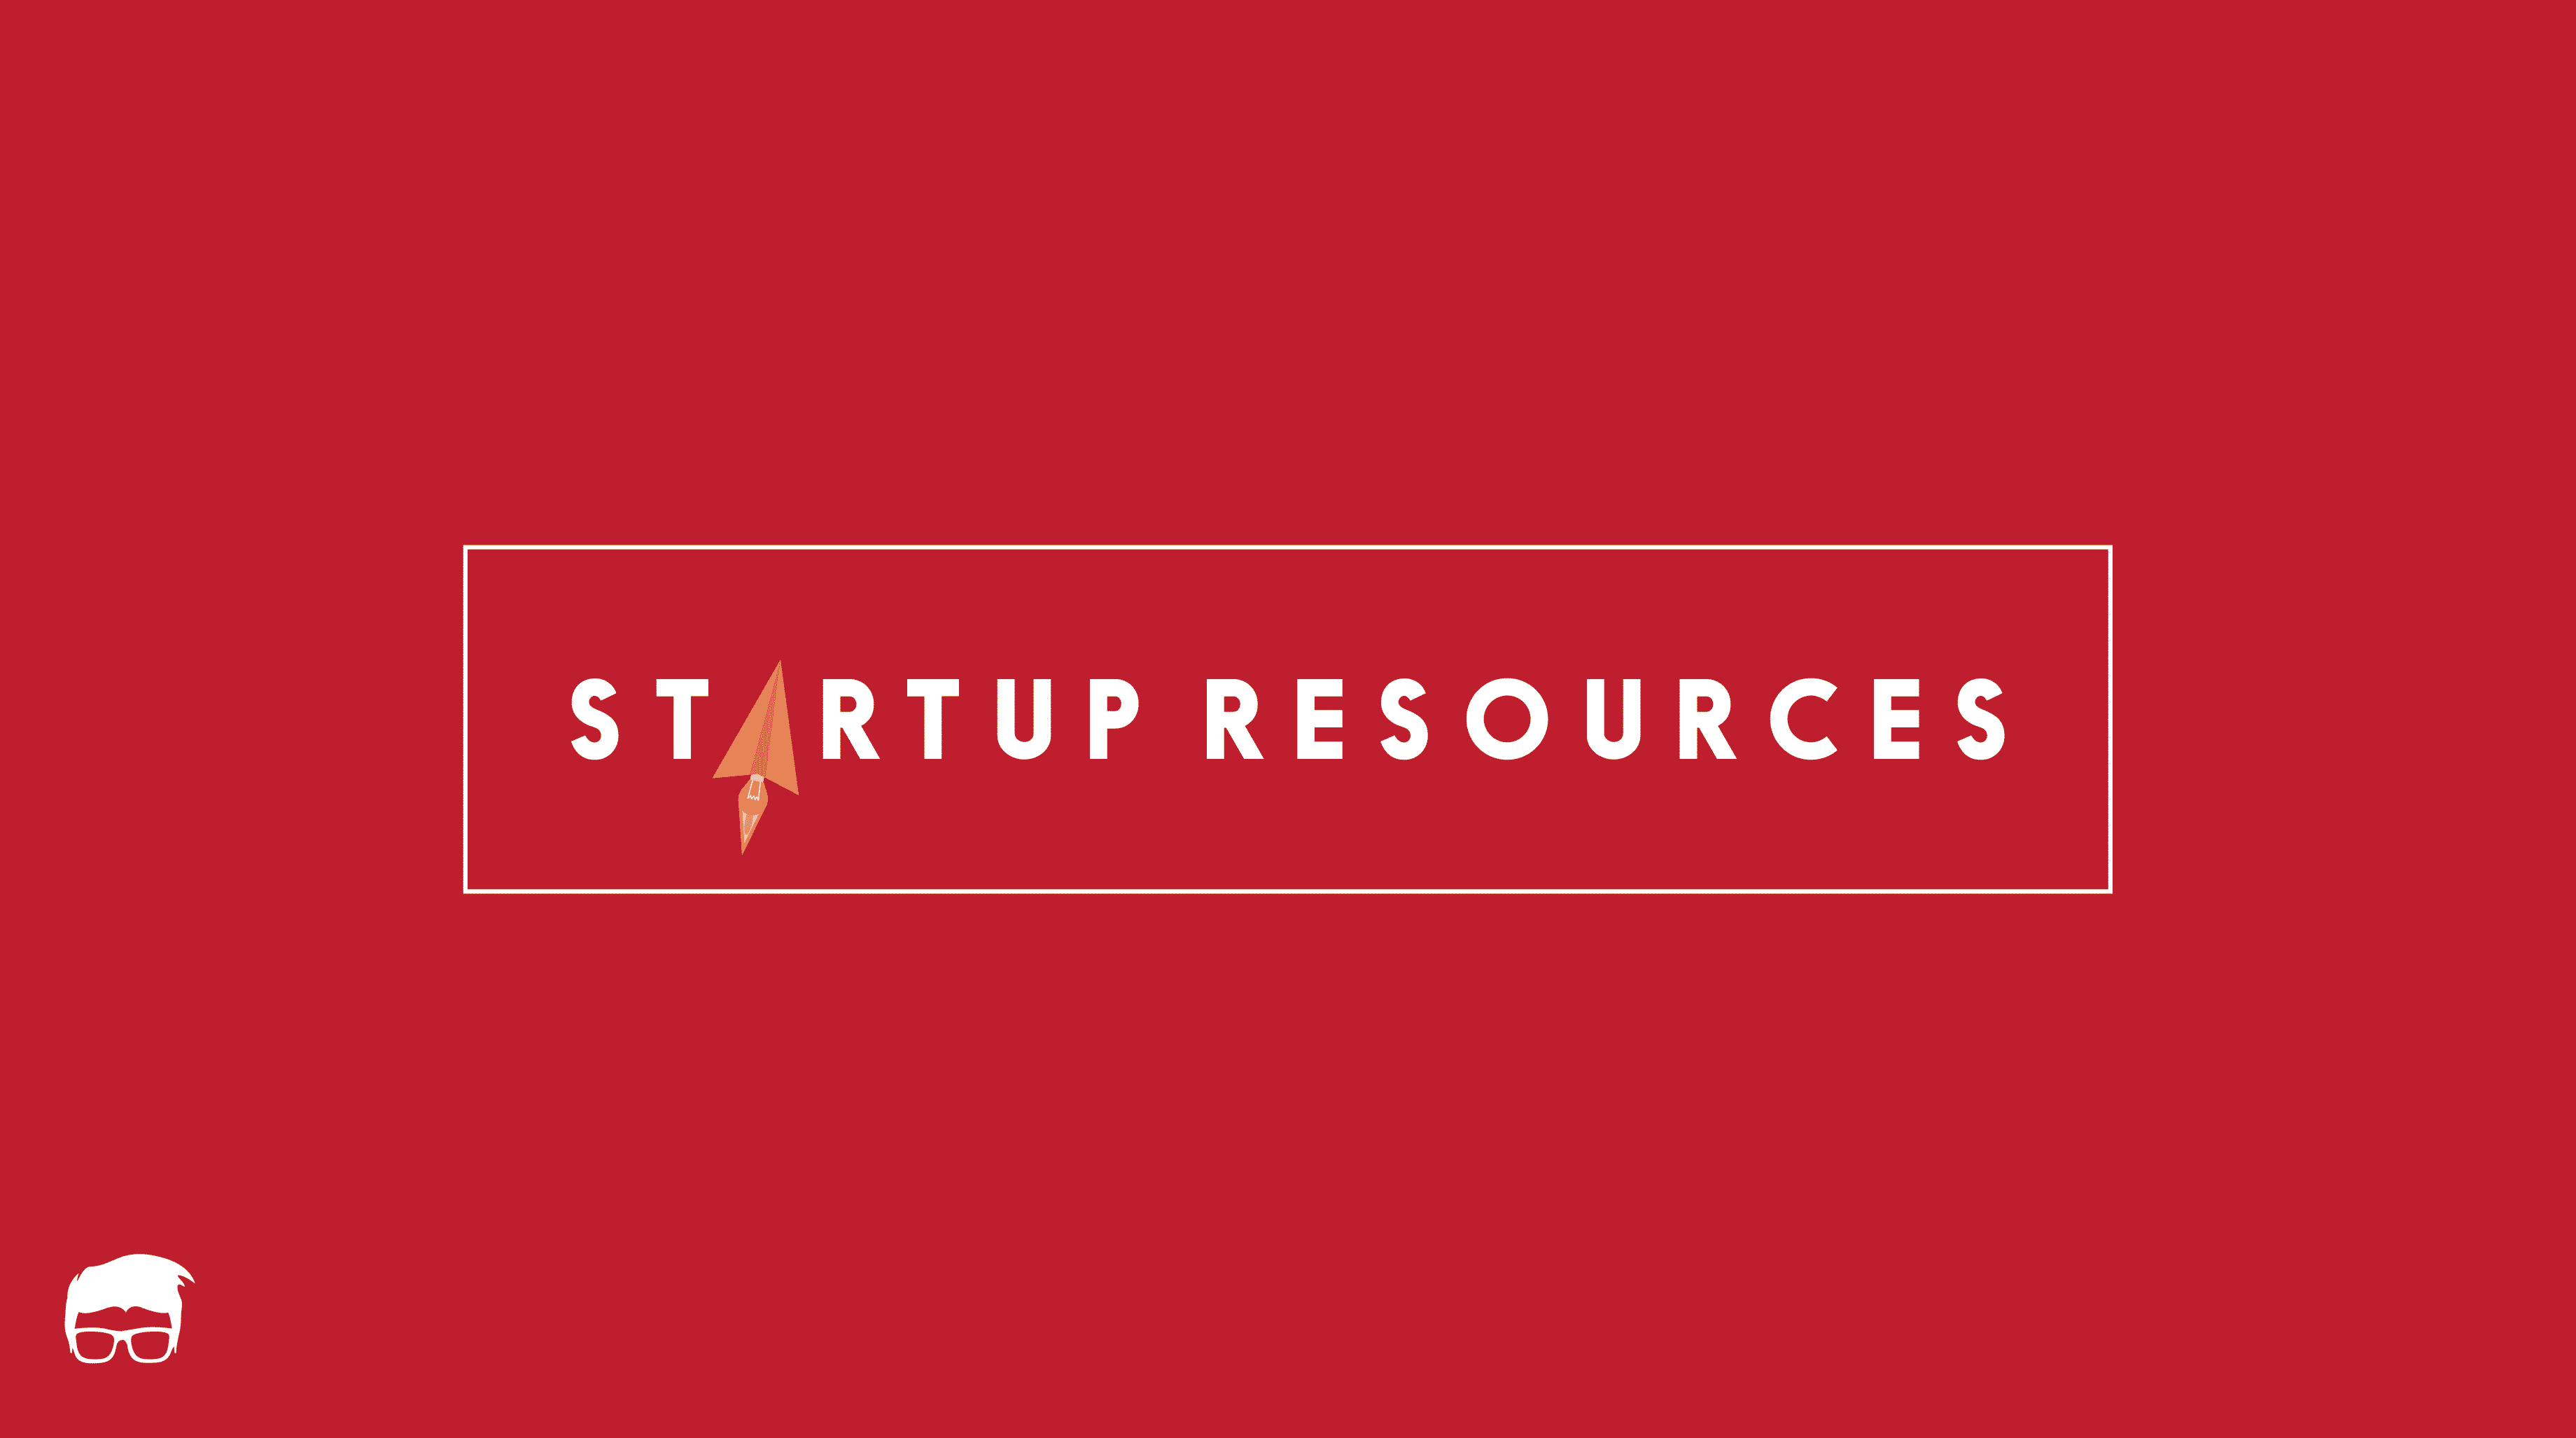 Startup Resources: The Best Startup Tools & Resources